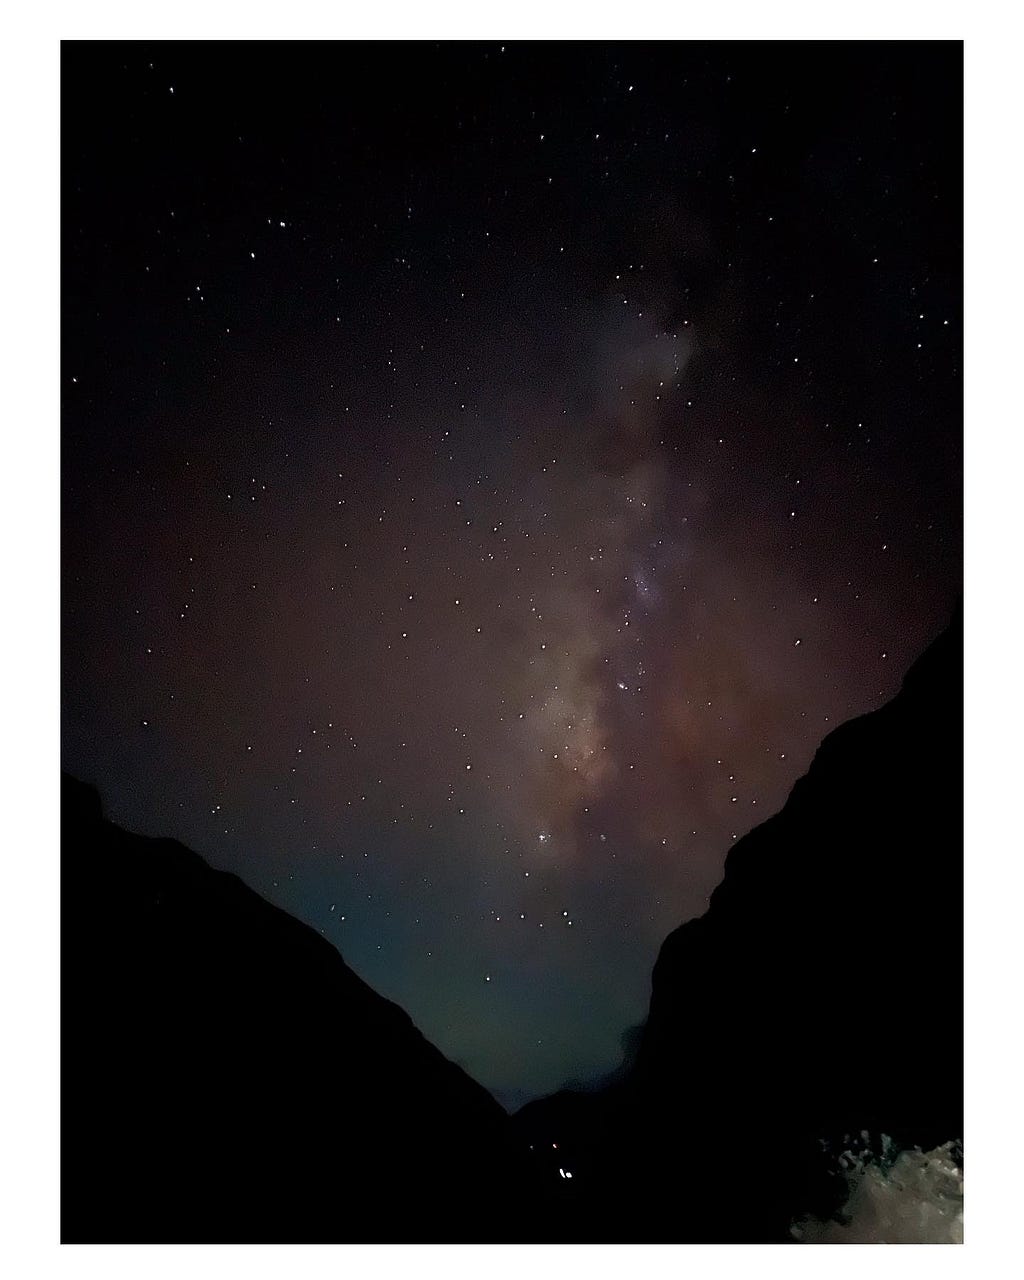 The milky way from the Himalayas, Nepal